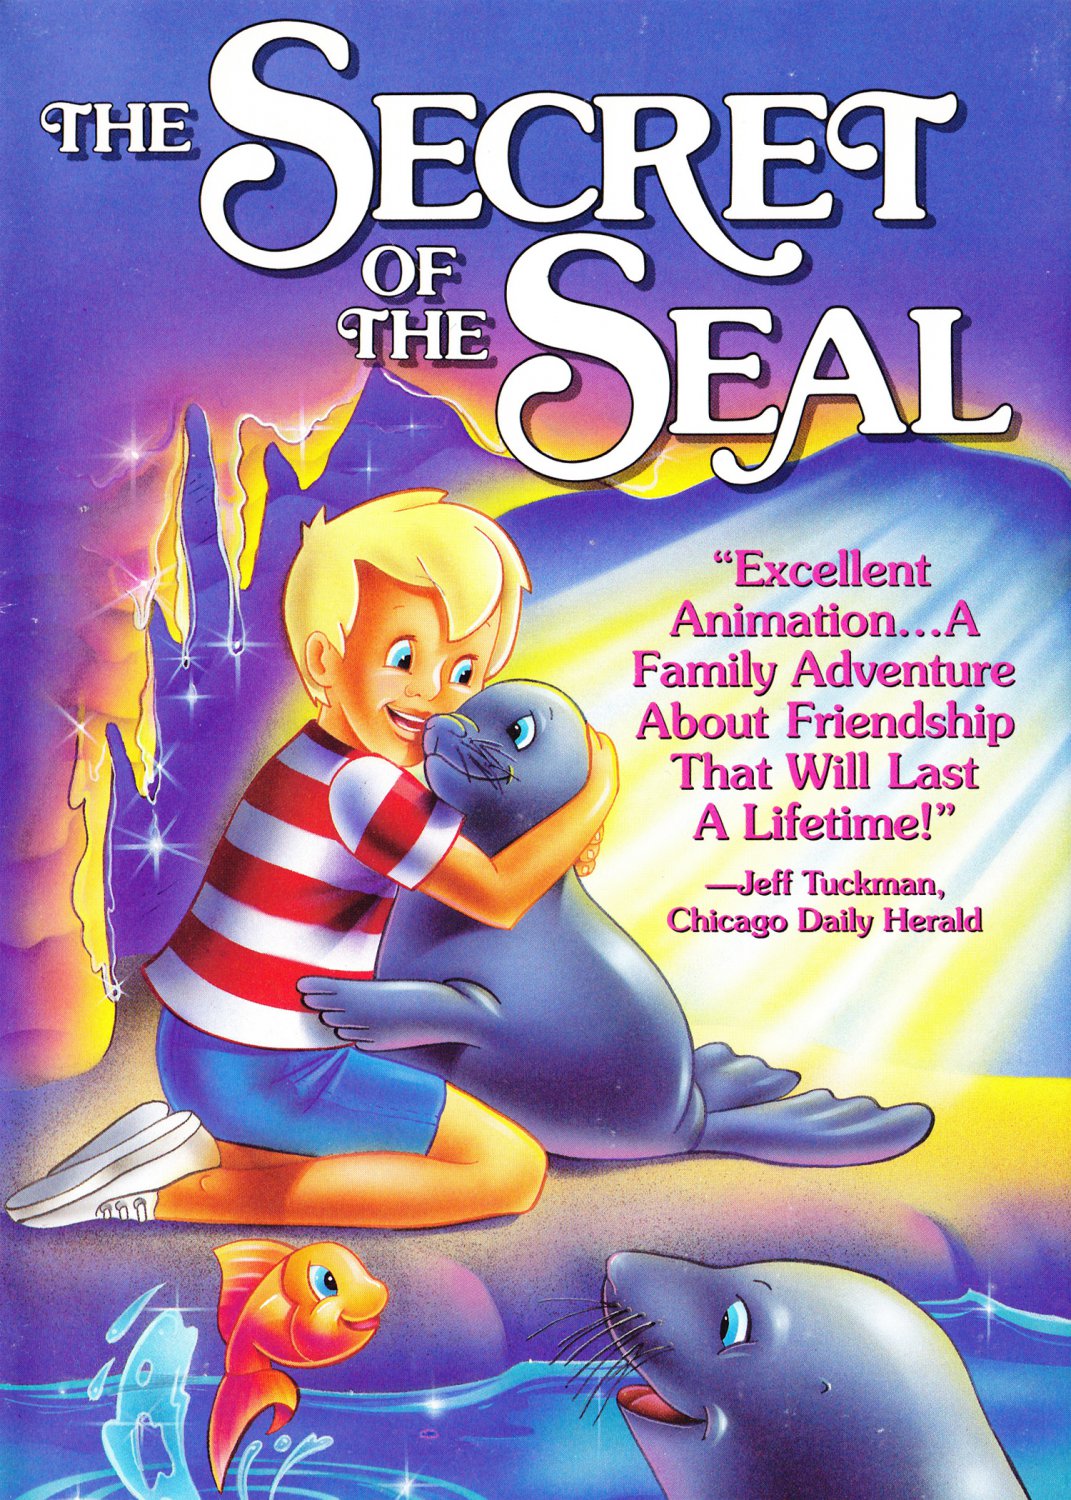 The Secret of the Seal (Tottoi) 1992 Anime film on DVD+R